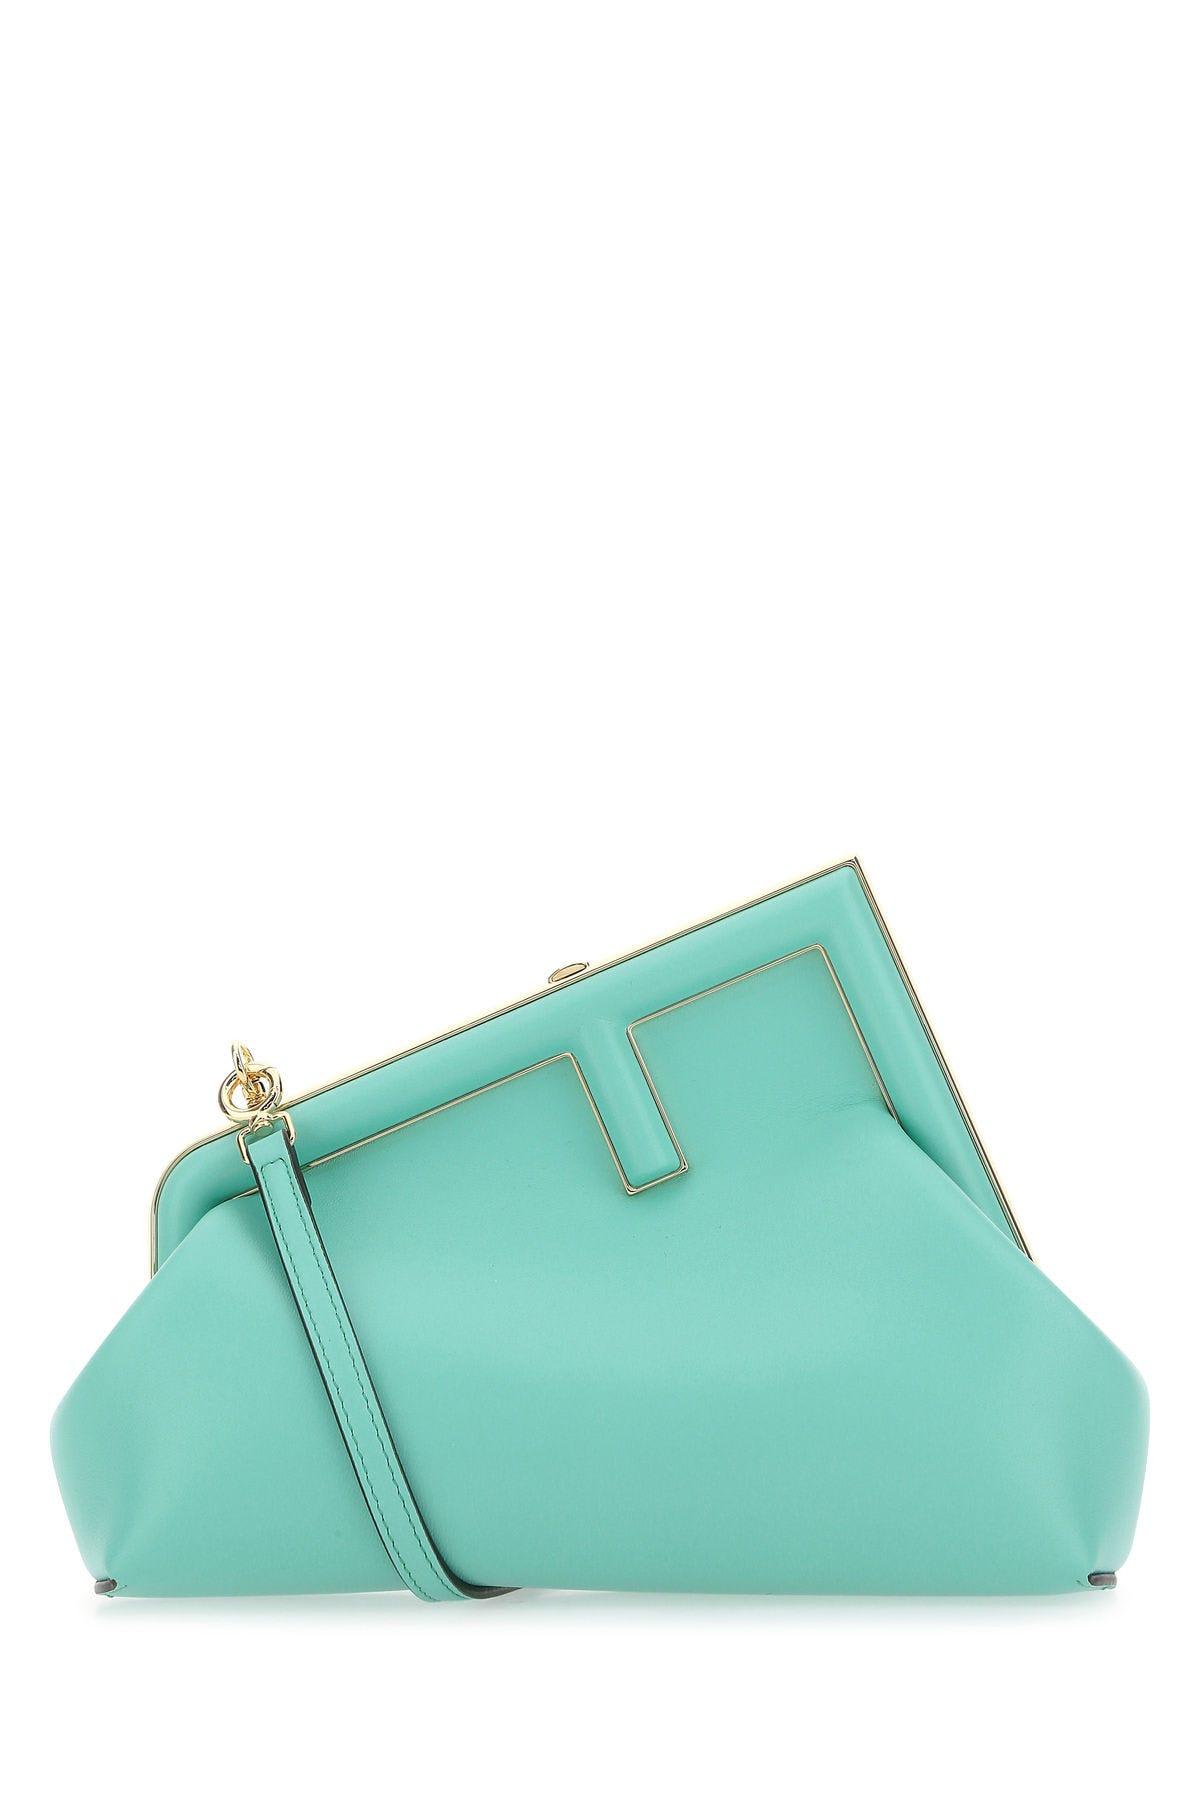 Fendi Light-blue Leather Small First Clutch